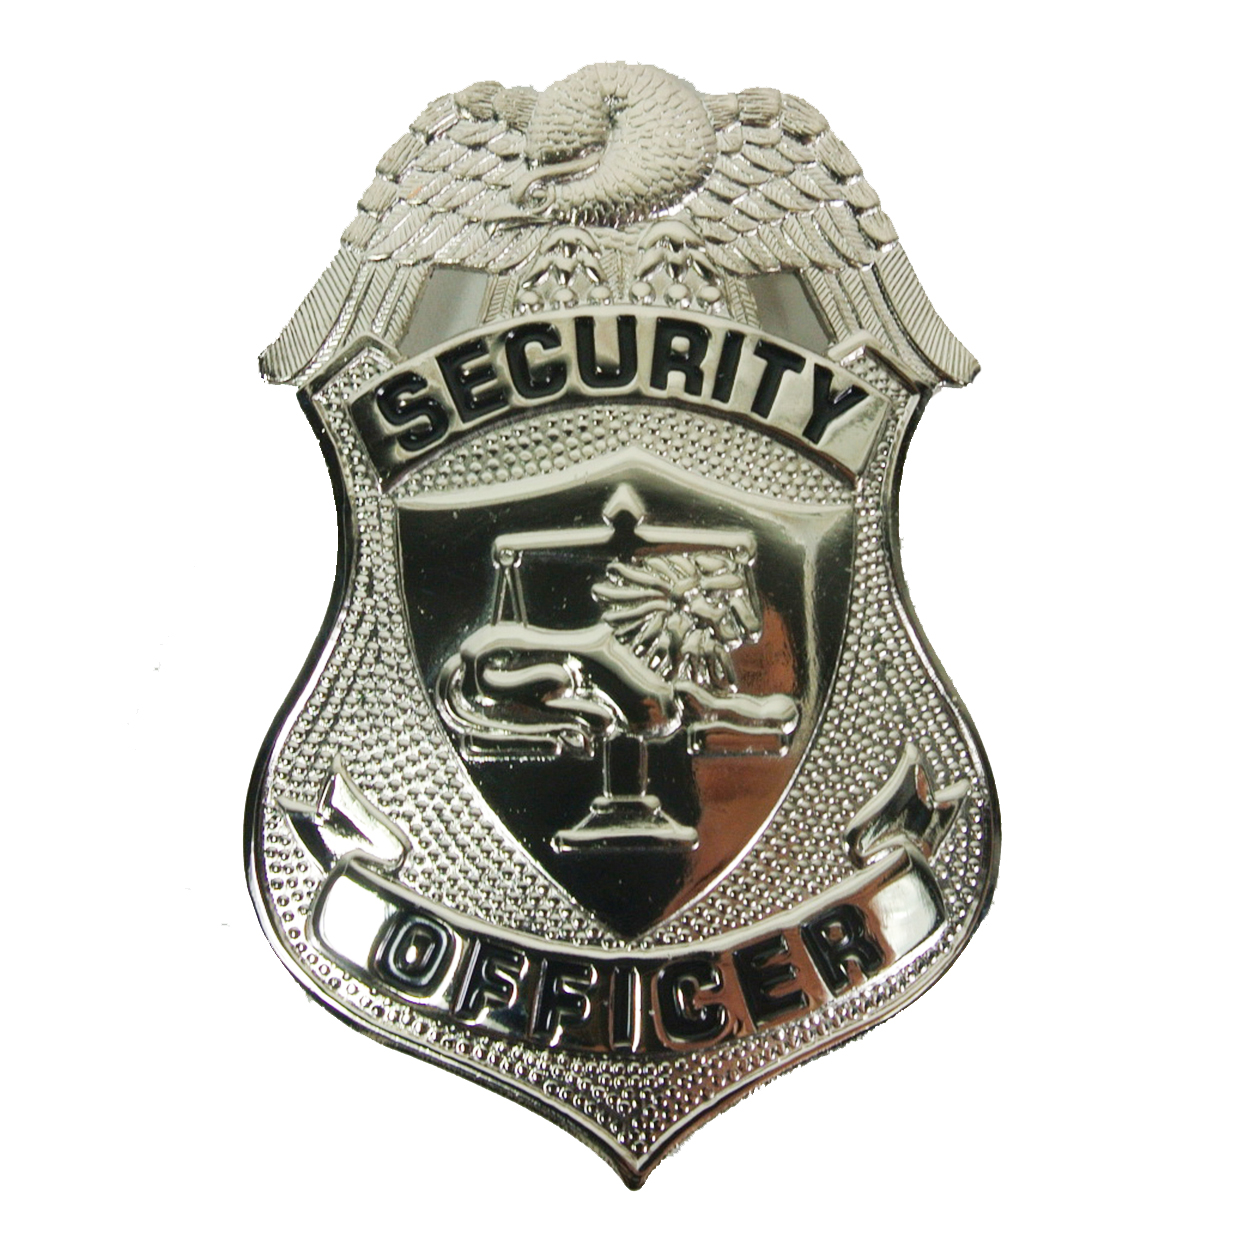 Badge security officer